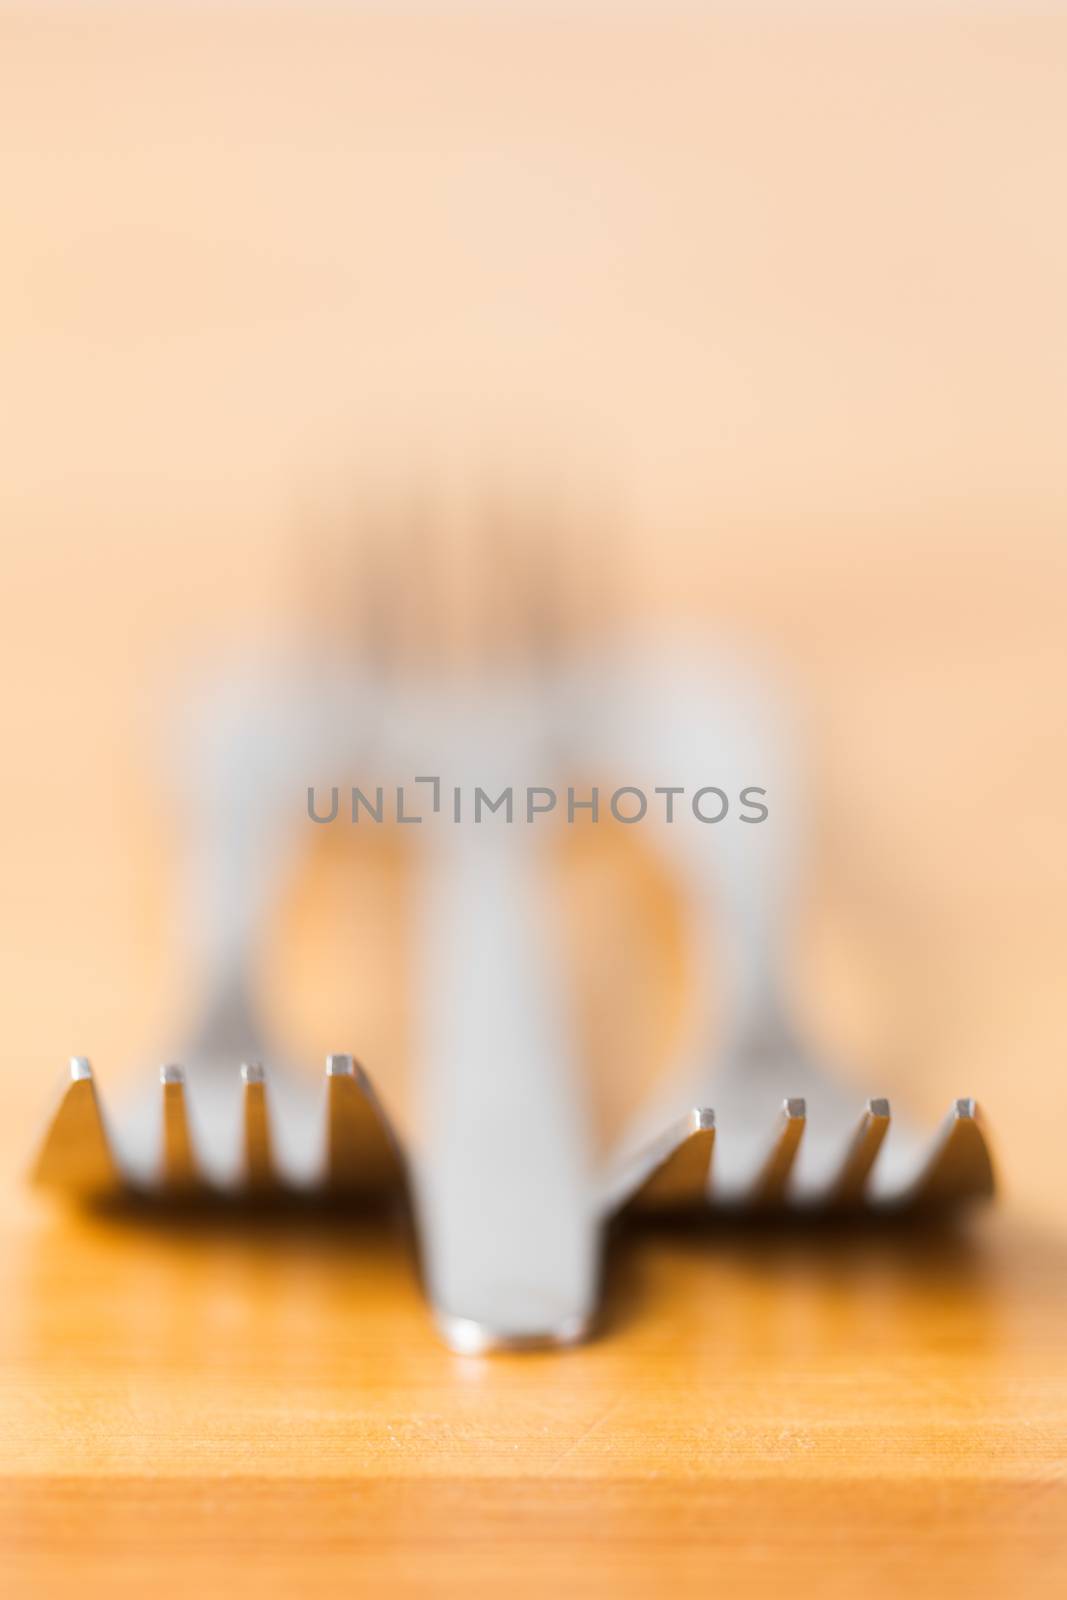 Silver cutlery abstract with very shallow dof to the tips of the forks as they lie on a wooden counter facing the viewer